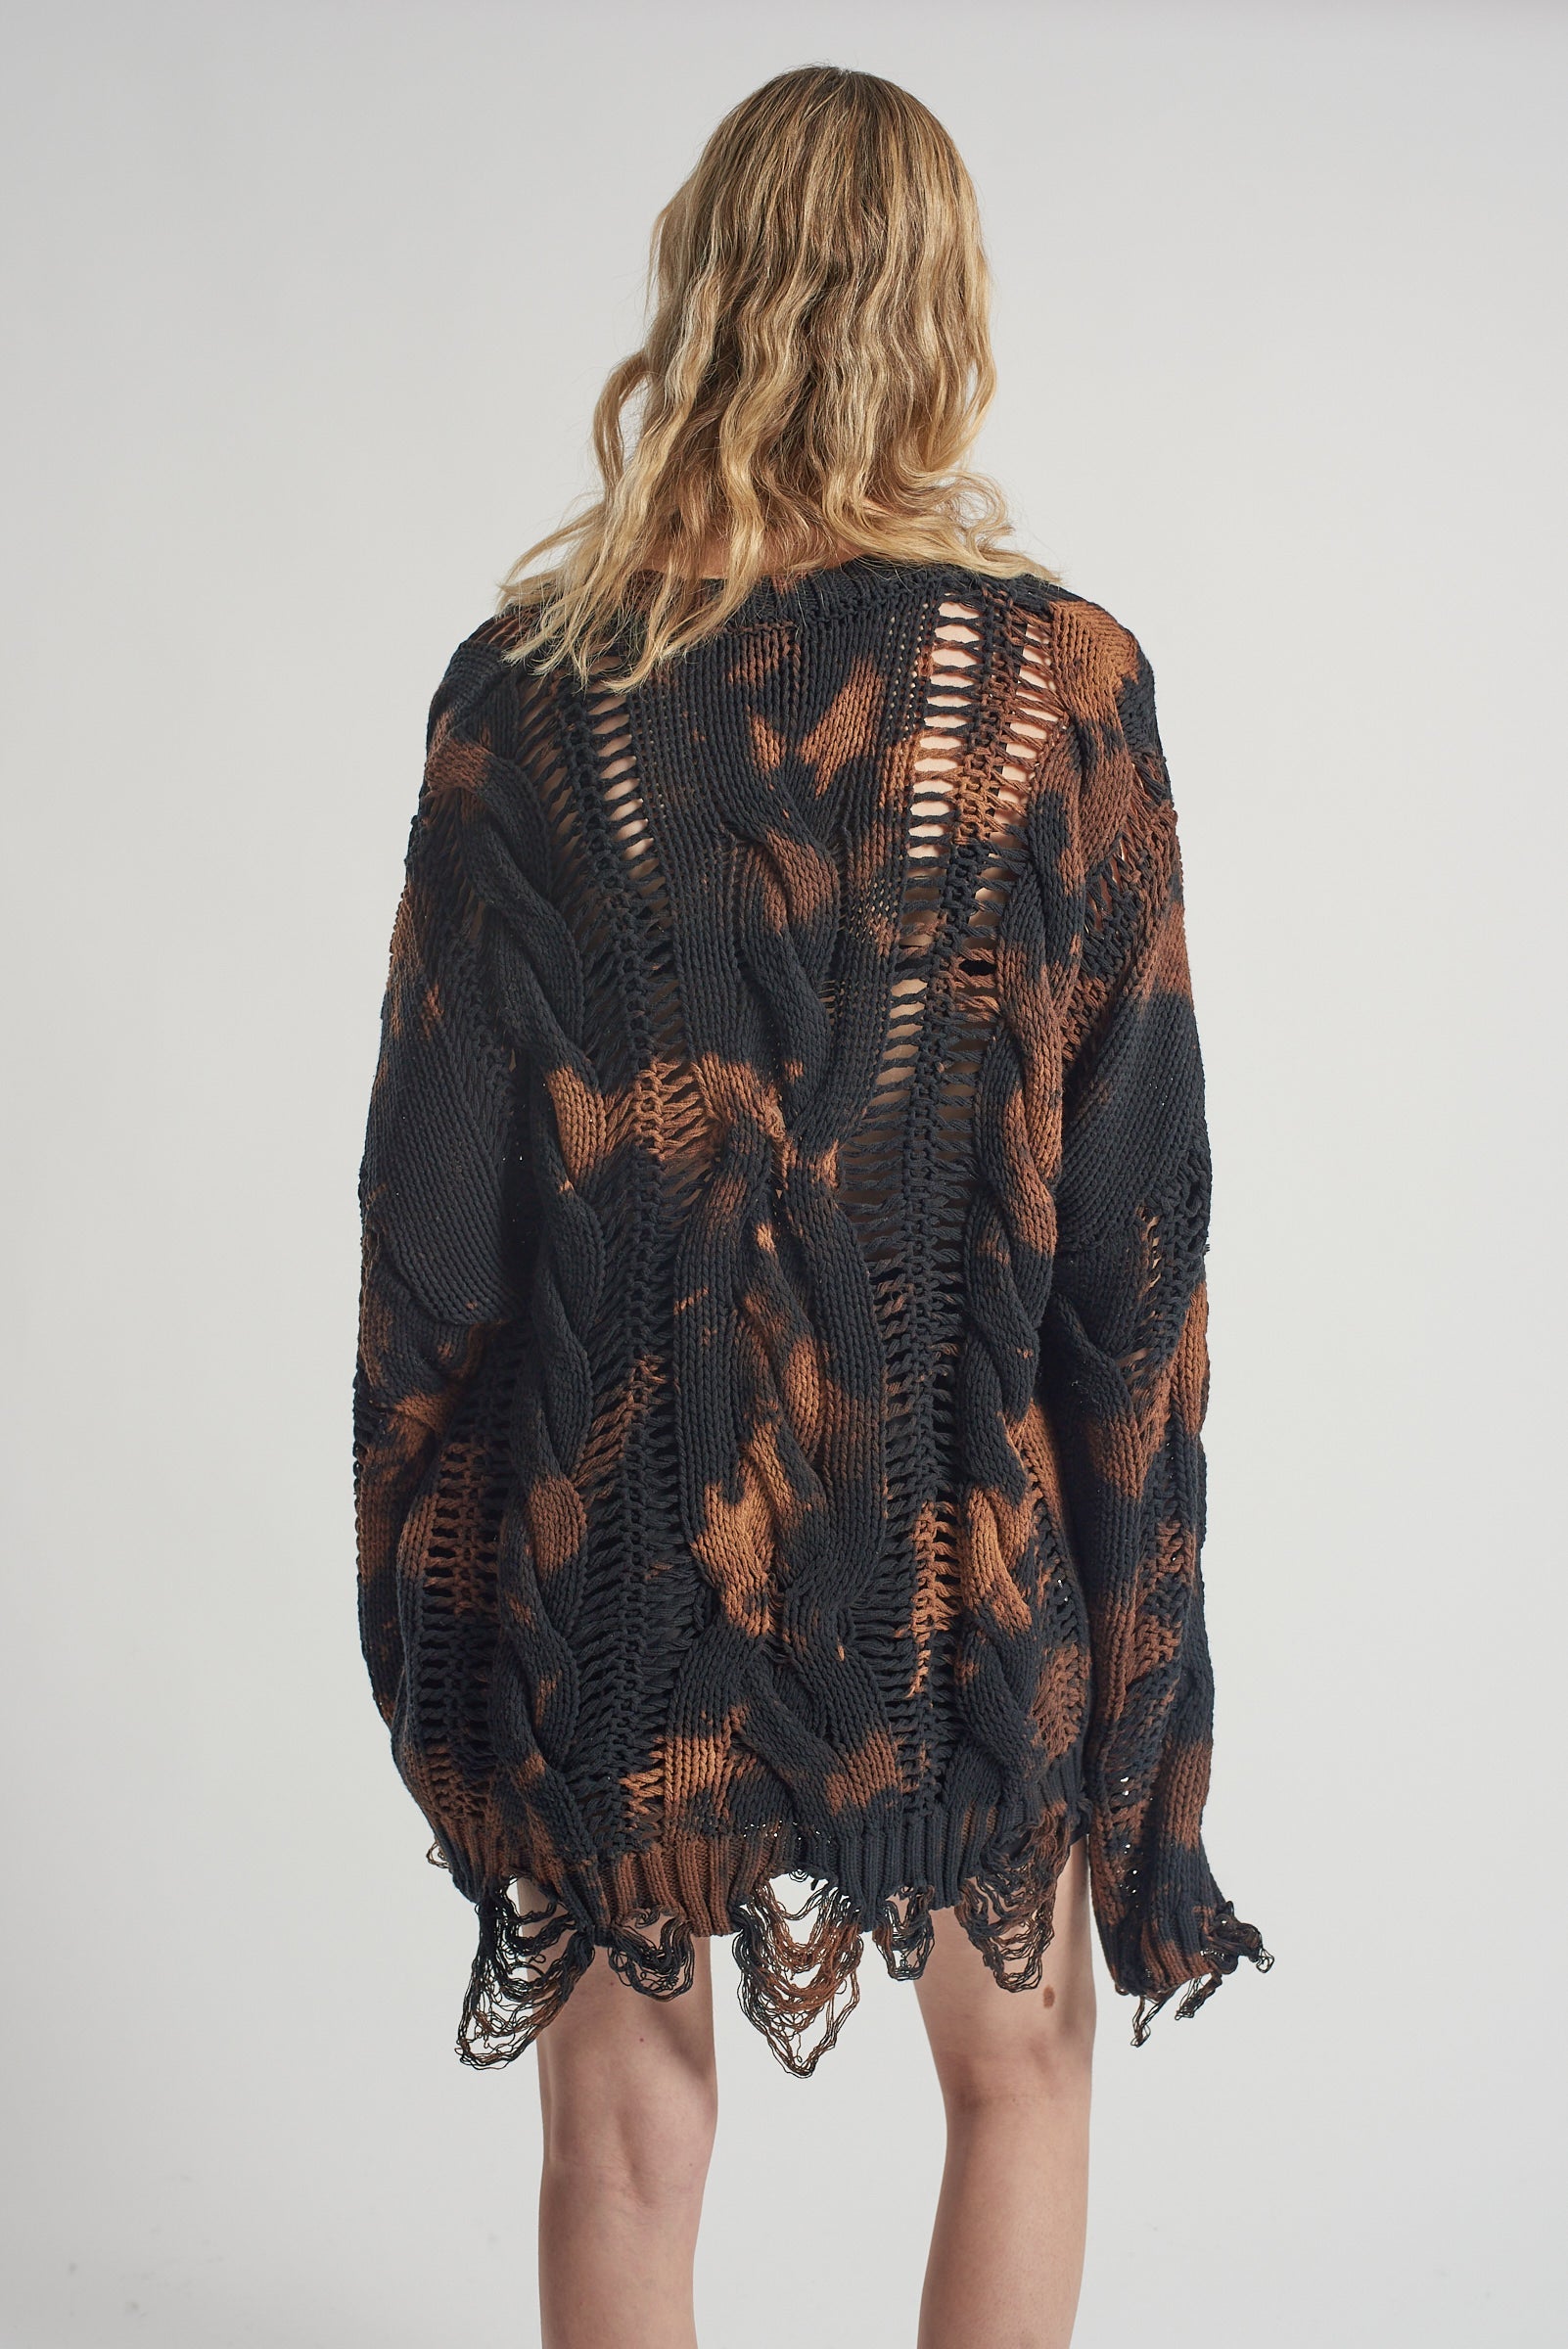 EXPLORE BLEACH DYE OVERSIZED KNIT - EXCLUSIVE Knitwear from THE RAGGED PRIEST - Just $86! SHOP NOW AT IAMINHATELOVE BOTH IN STORE FOR CYPRUS AND ONLINE WORLDWIDE